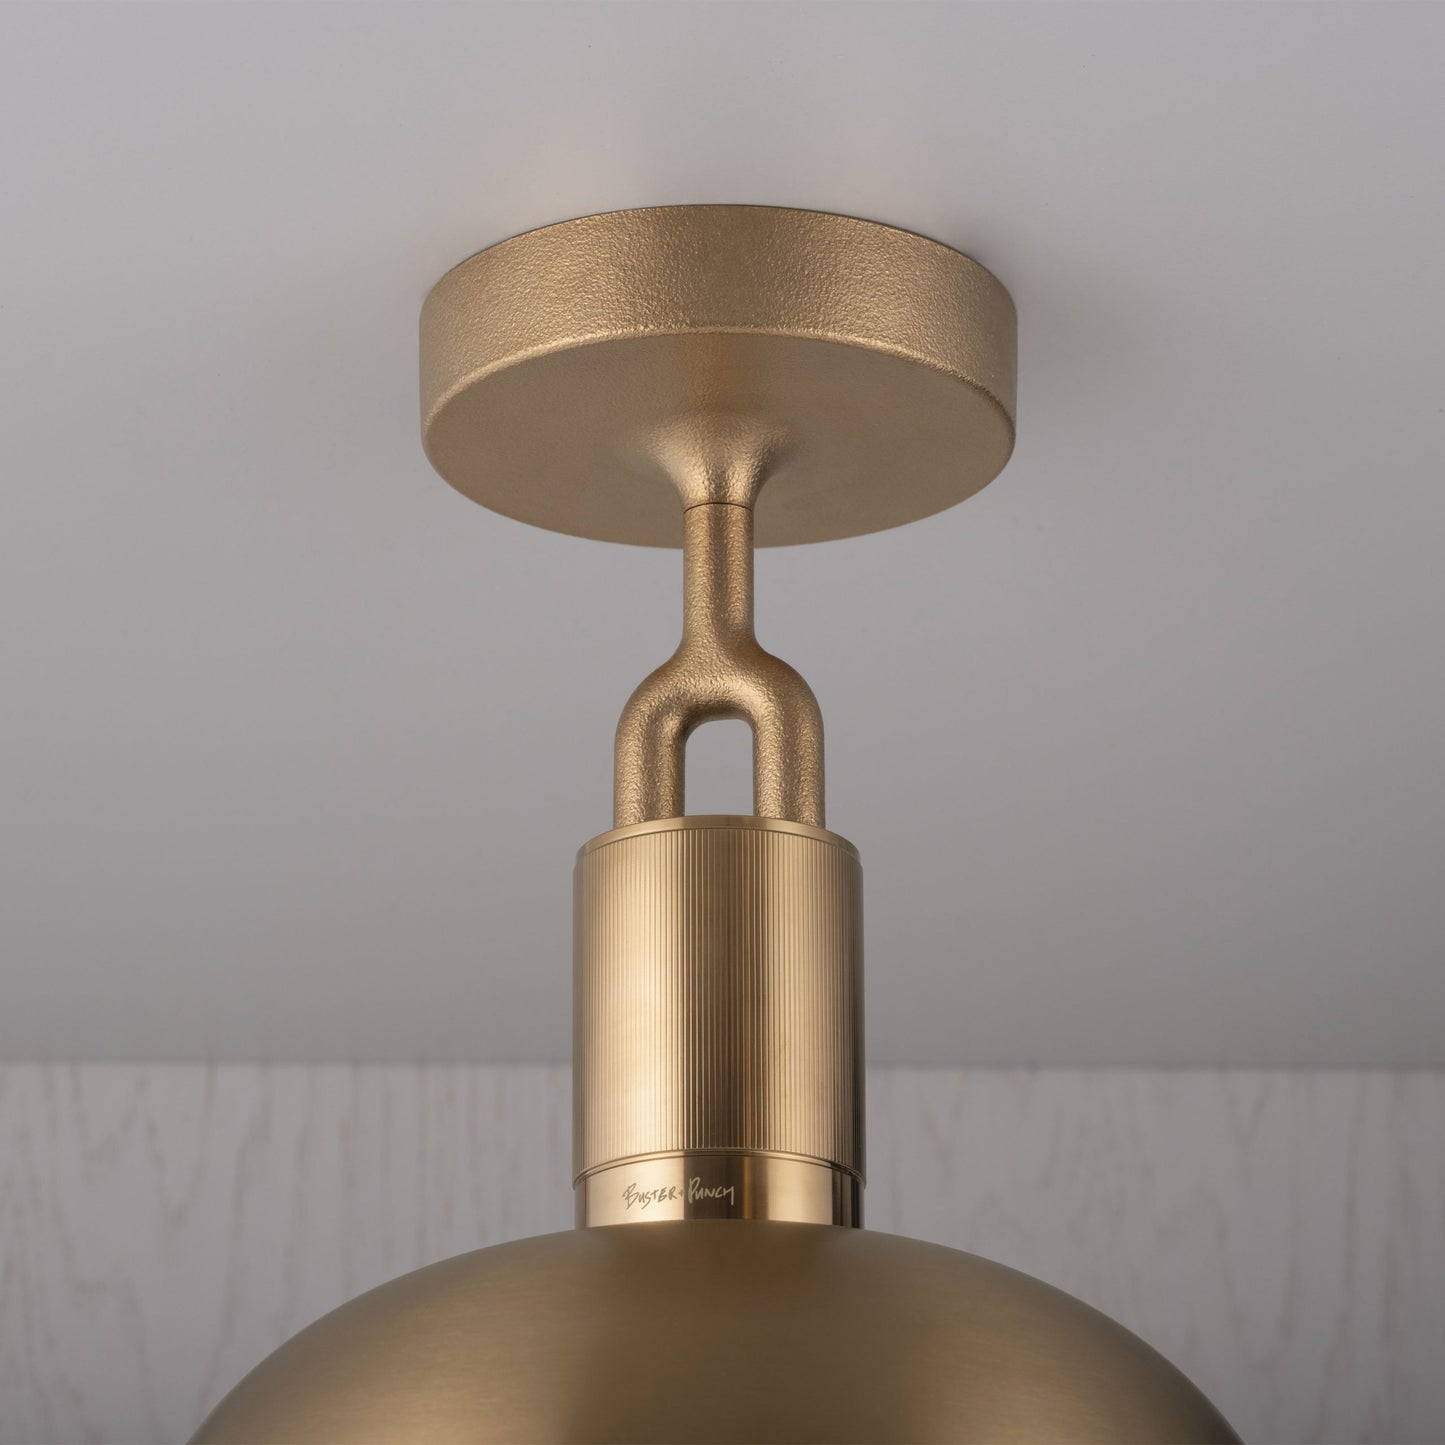 Forked Ceiling Light / Shade / Globe / Opal / Large Brass, detailed close up view of fork and fitting.